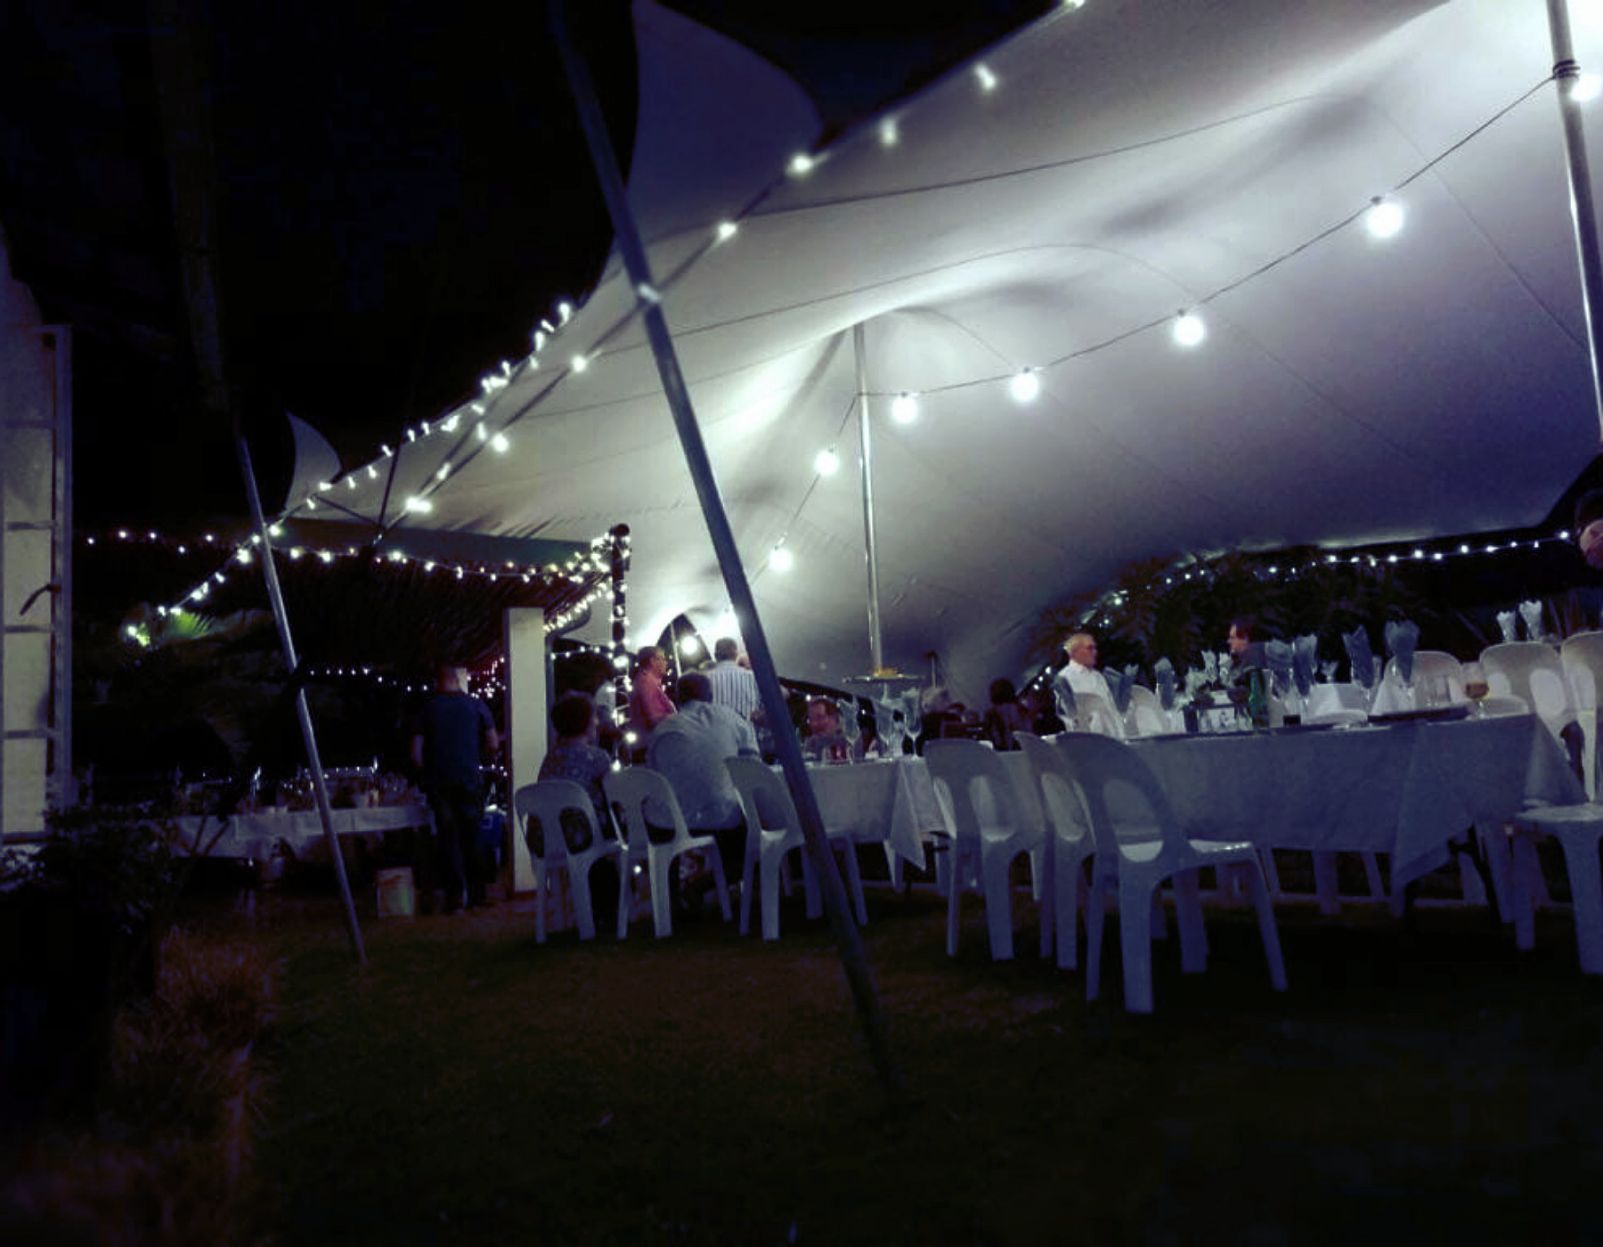 Tent Set Up In A Garden With Lights And Tables And Chairs.